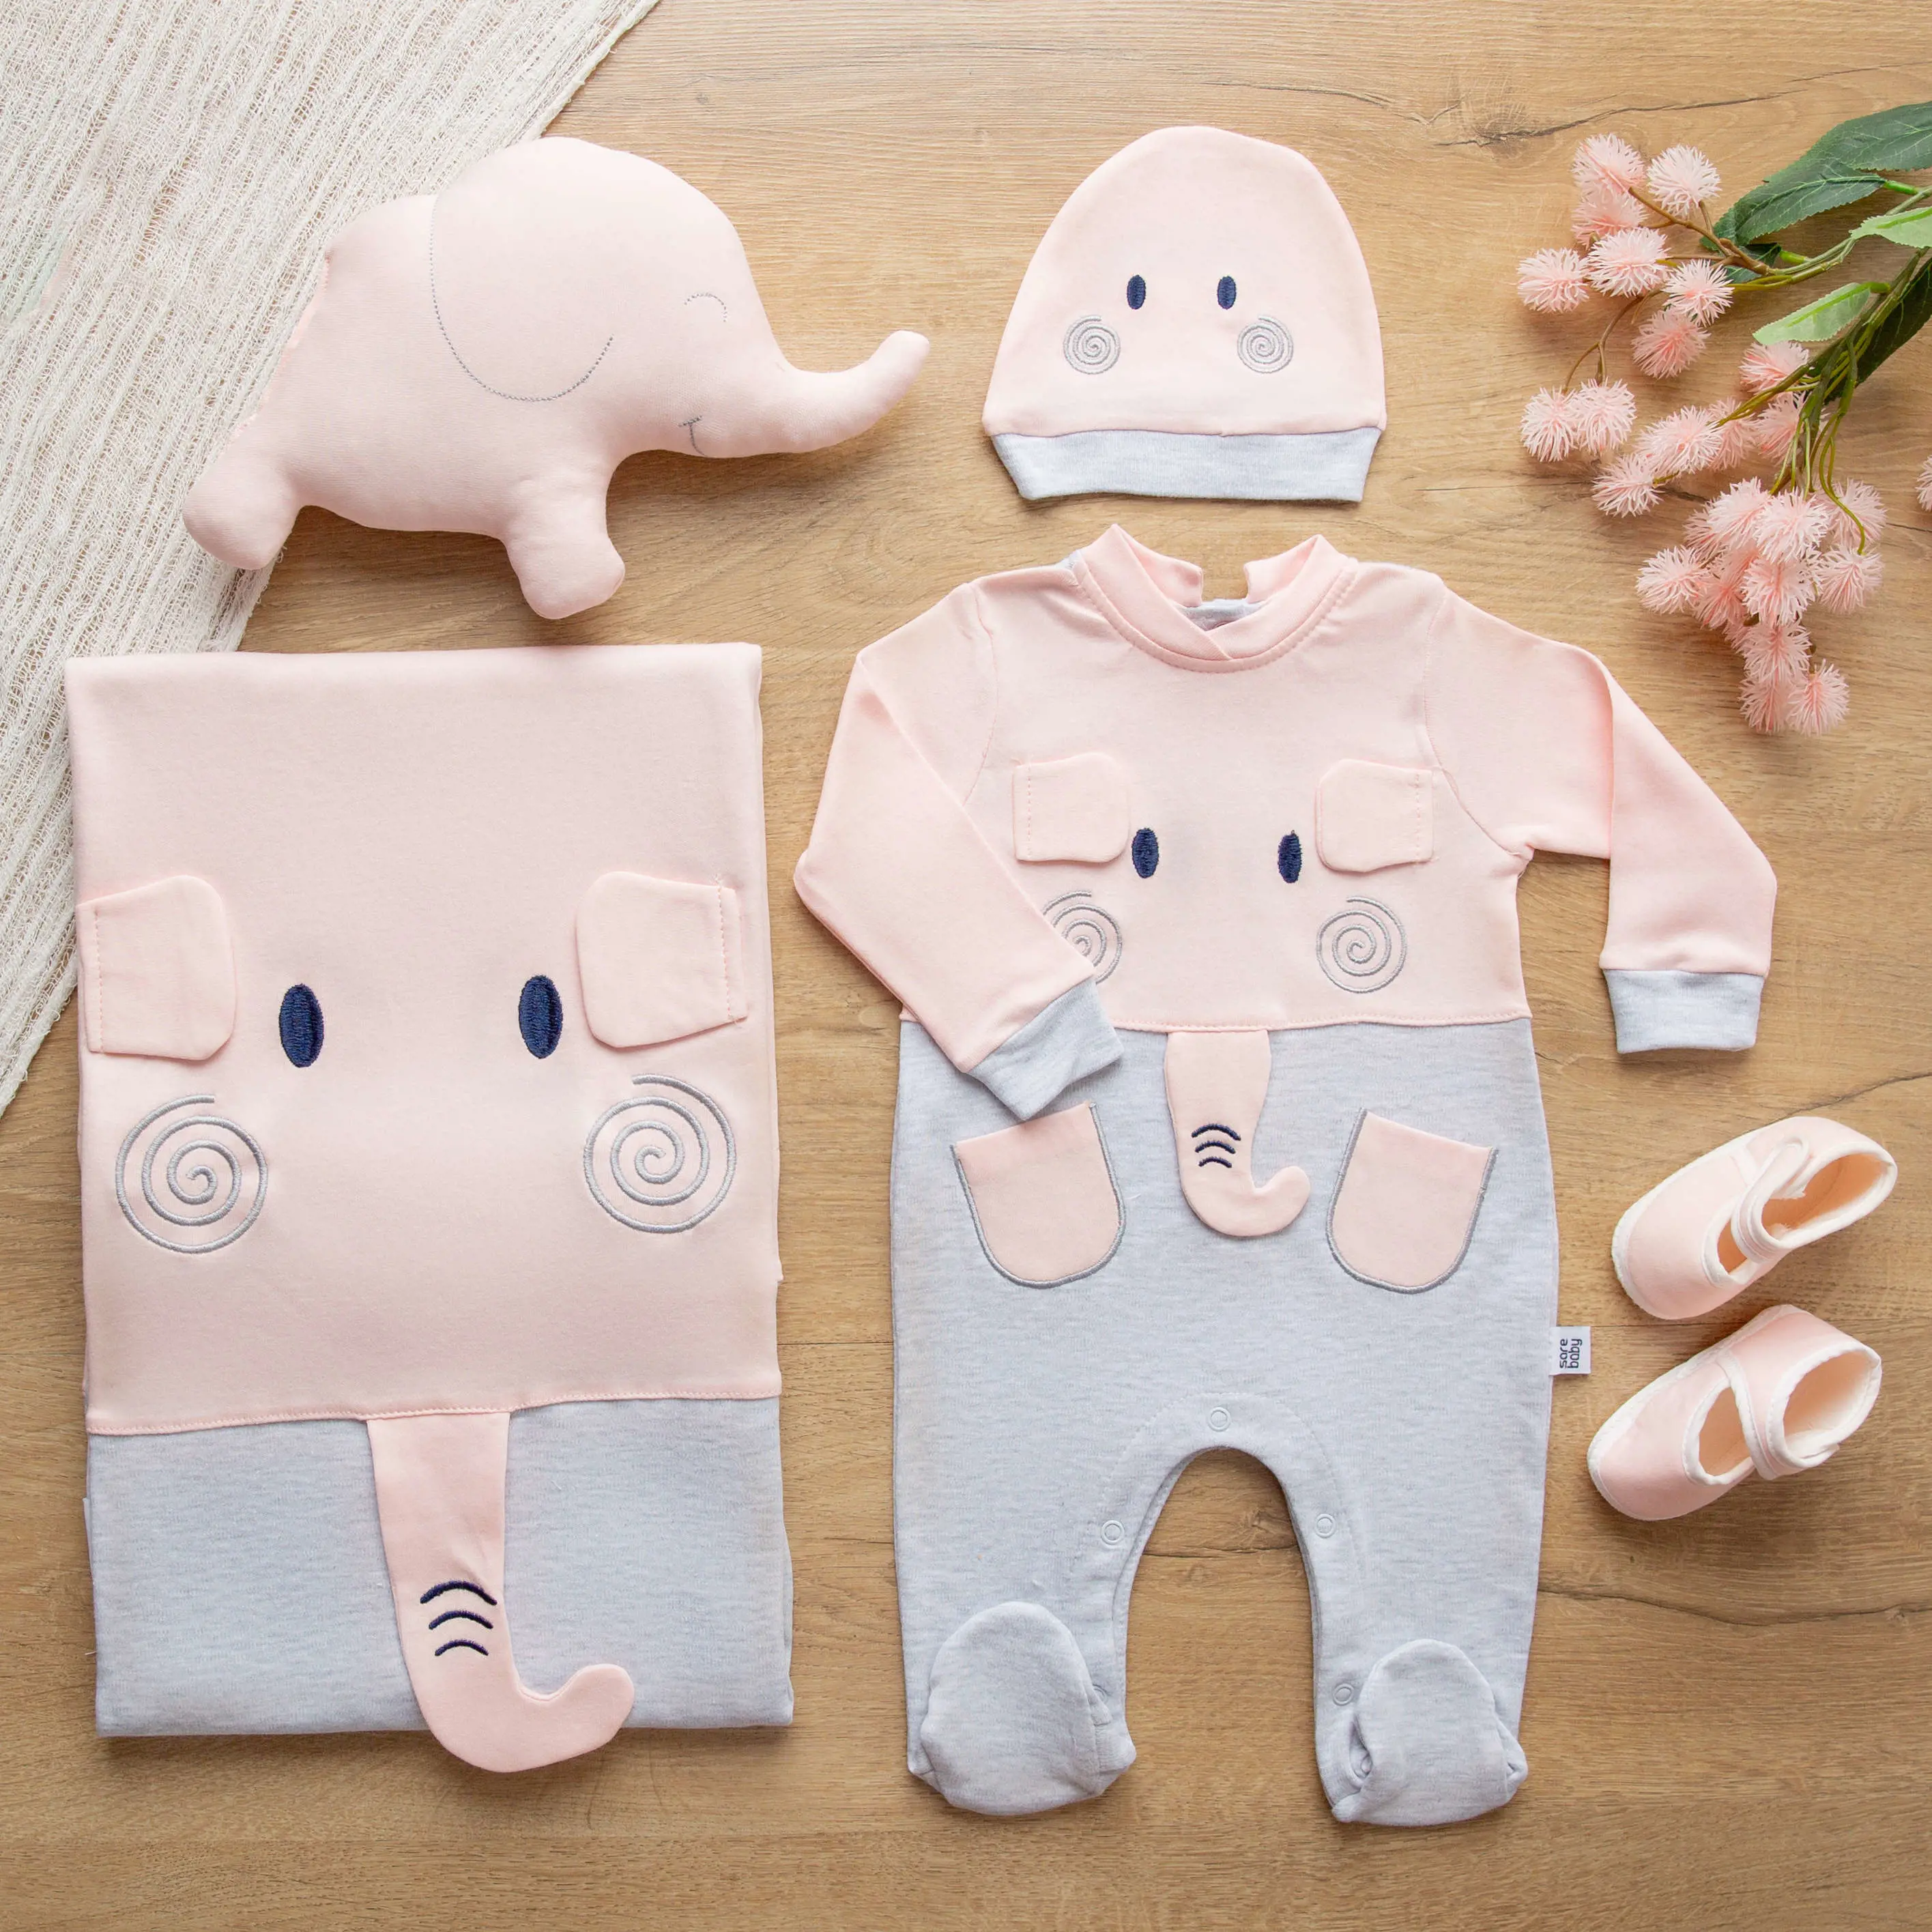 Sarebaby %100 Natural Cotton Cute Elephant Series Coming Home 10 Pieces Set with Toy Gift